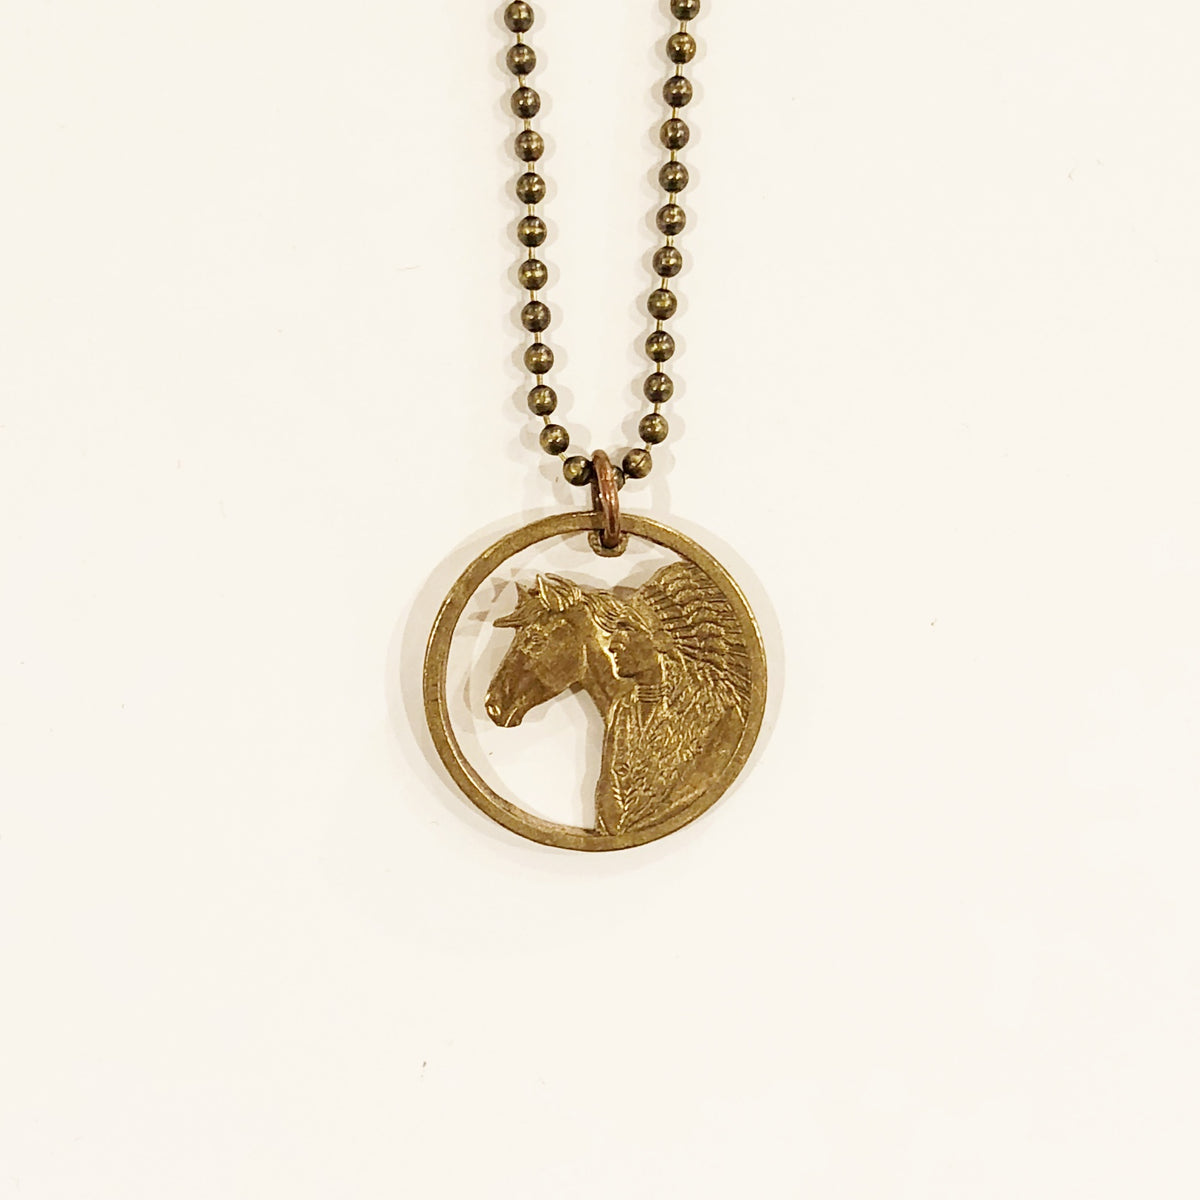 A TSY Hand-Cut Native American Indian + Horse Bronze Vintage Coin Pendant Necklaces, Jewelry, FINAL SALE!